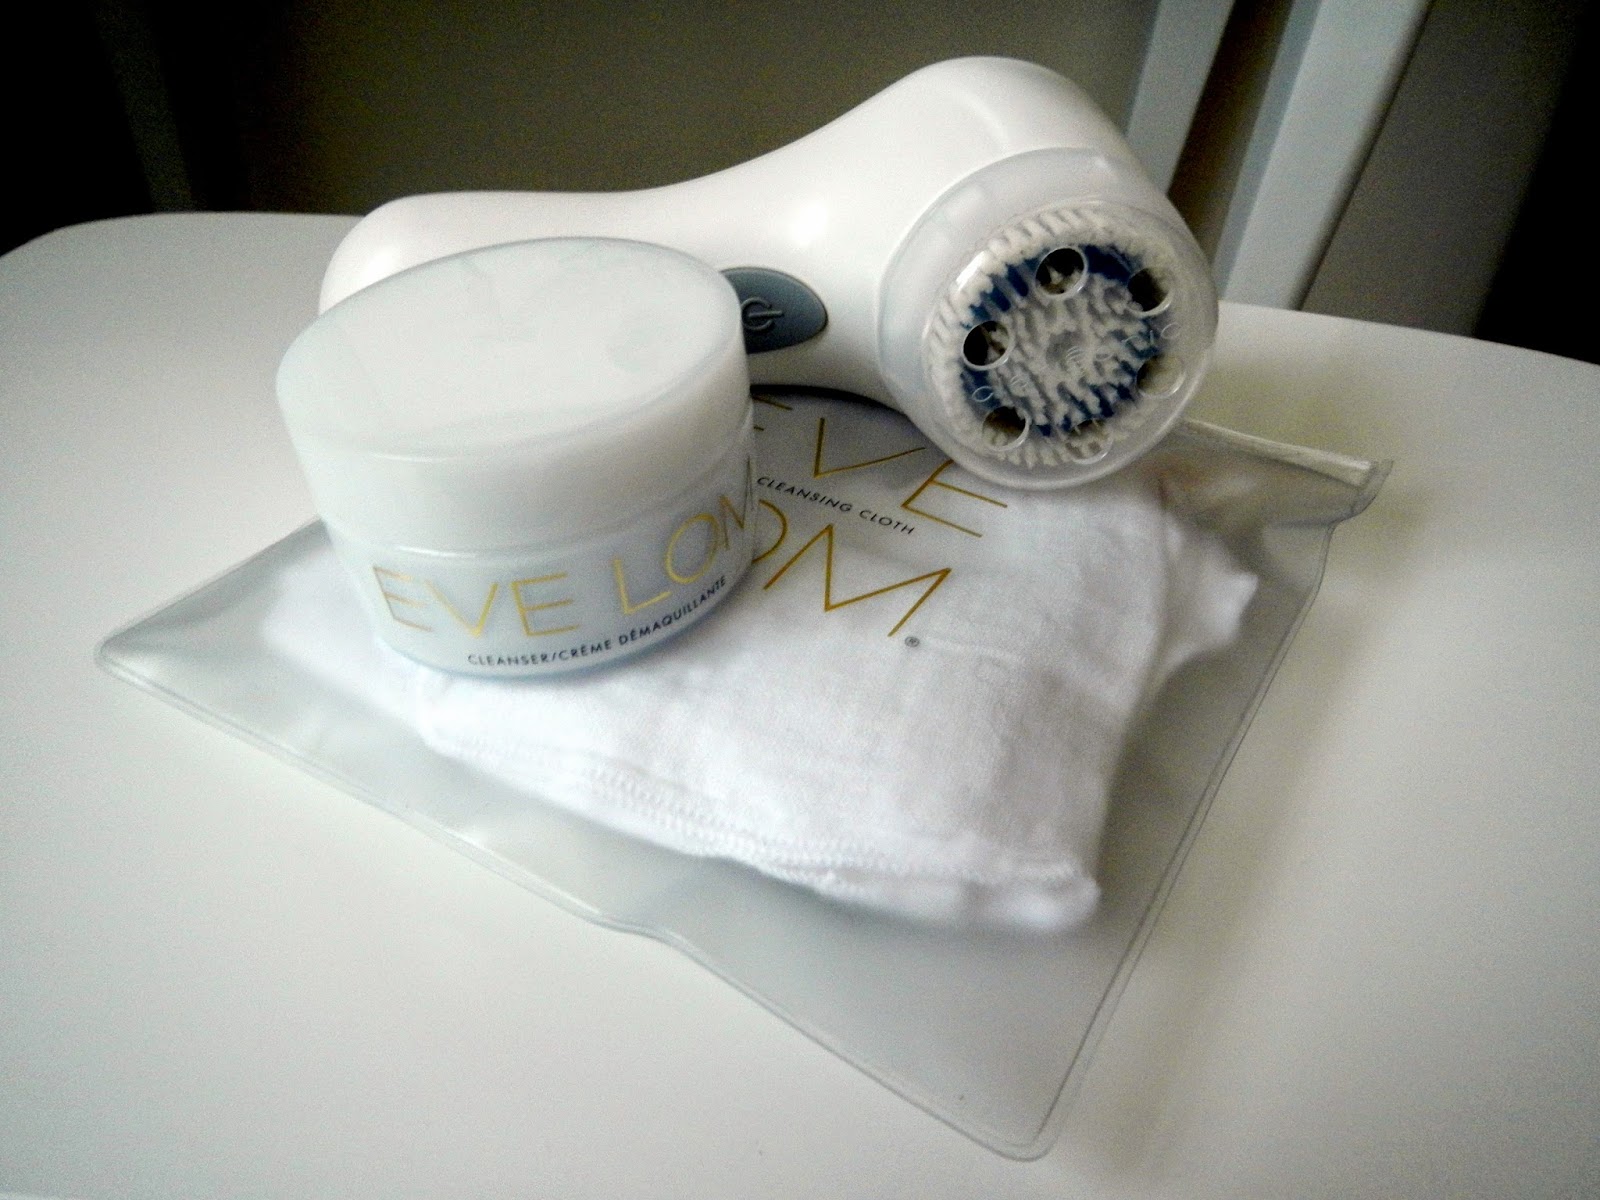 Eve Lom Cleanser - The Cult Classic